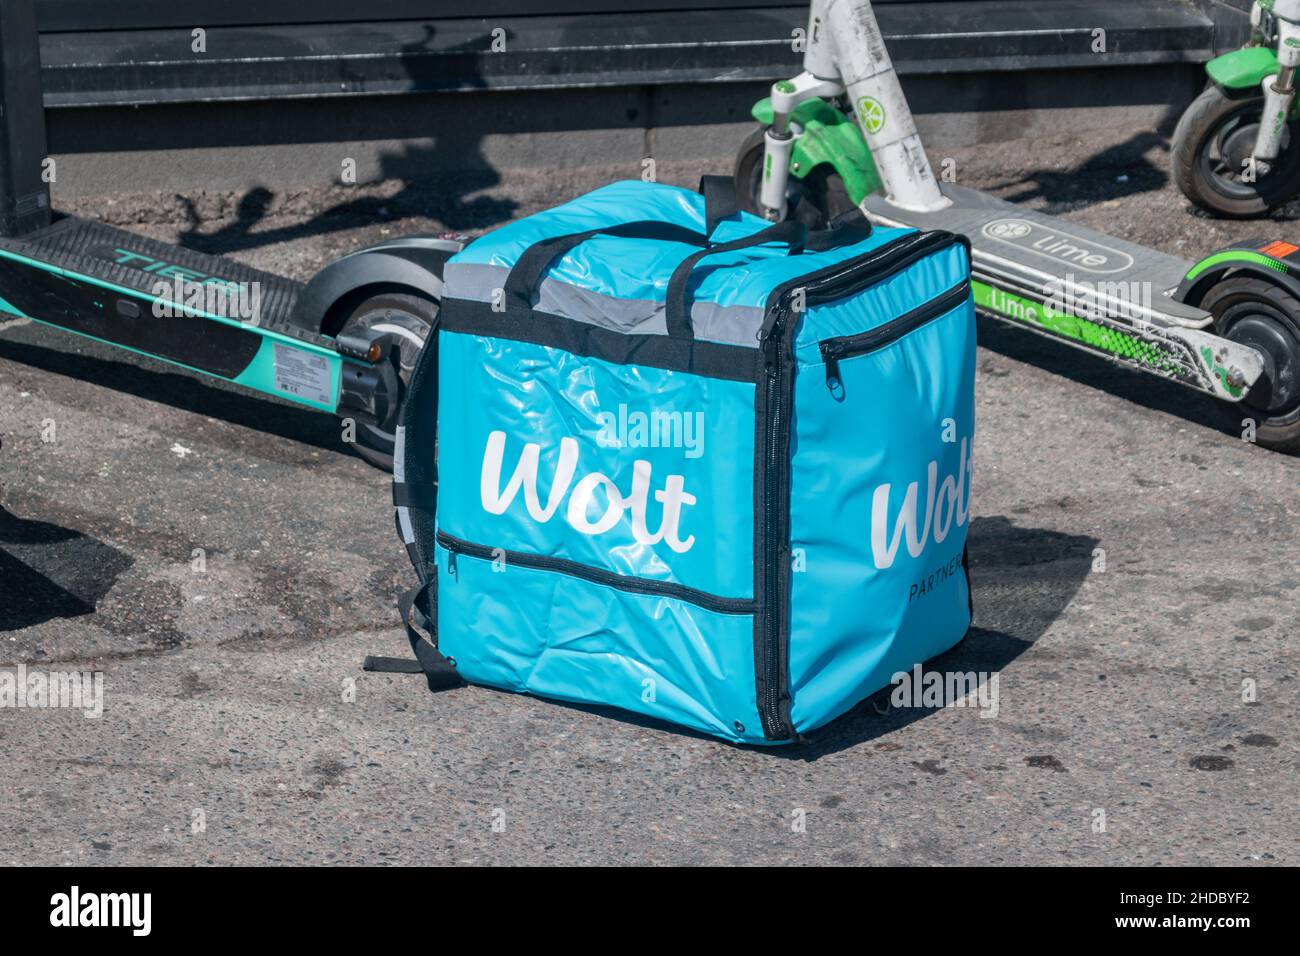 Helsinki, Finland - August 5, 2021: Wolt delivery bag. Wolt is food delivery service. Stock Photo